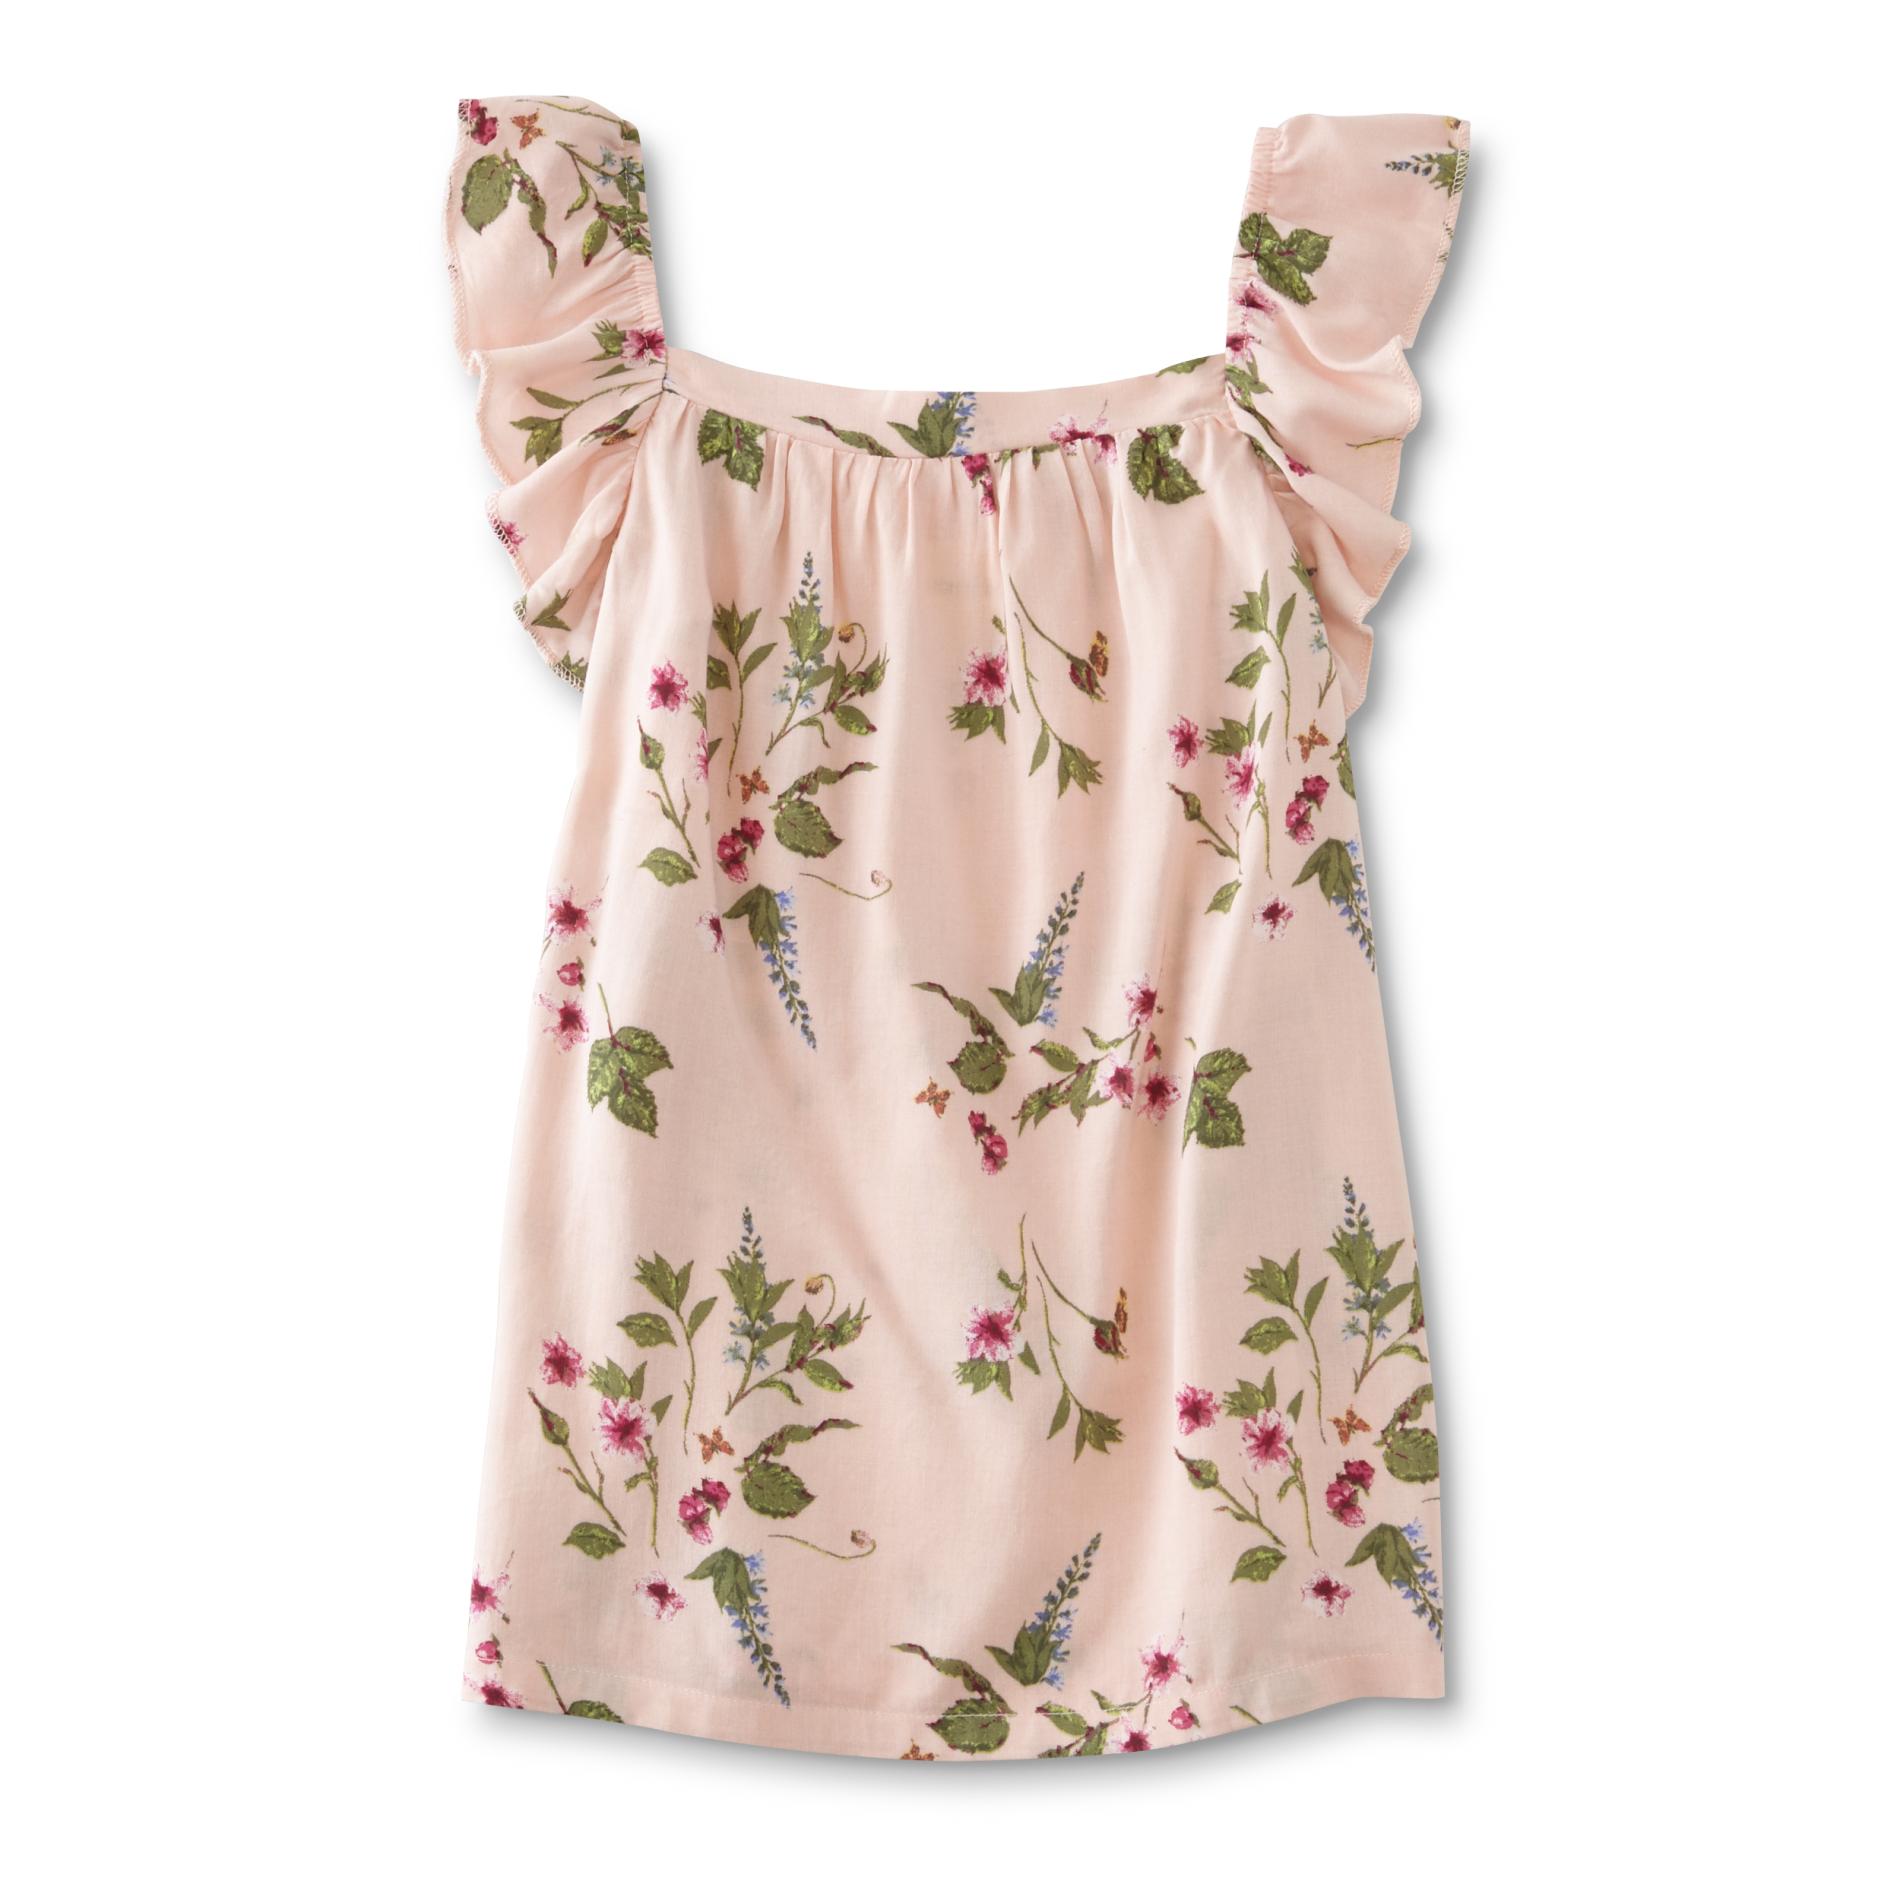 Toughskins Infant & Toddler Girls' Ruffle Top - Floral Butterfly